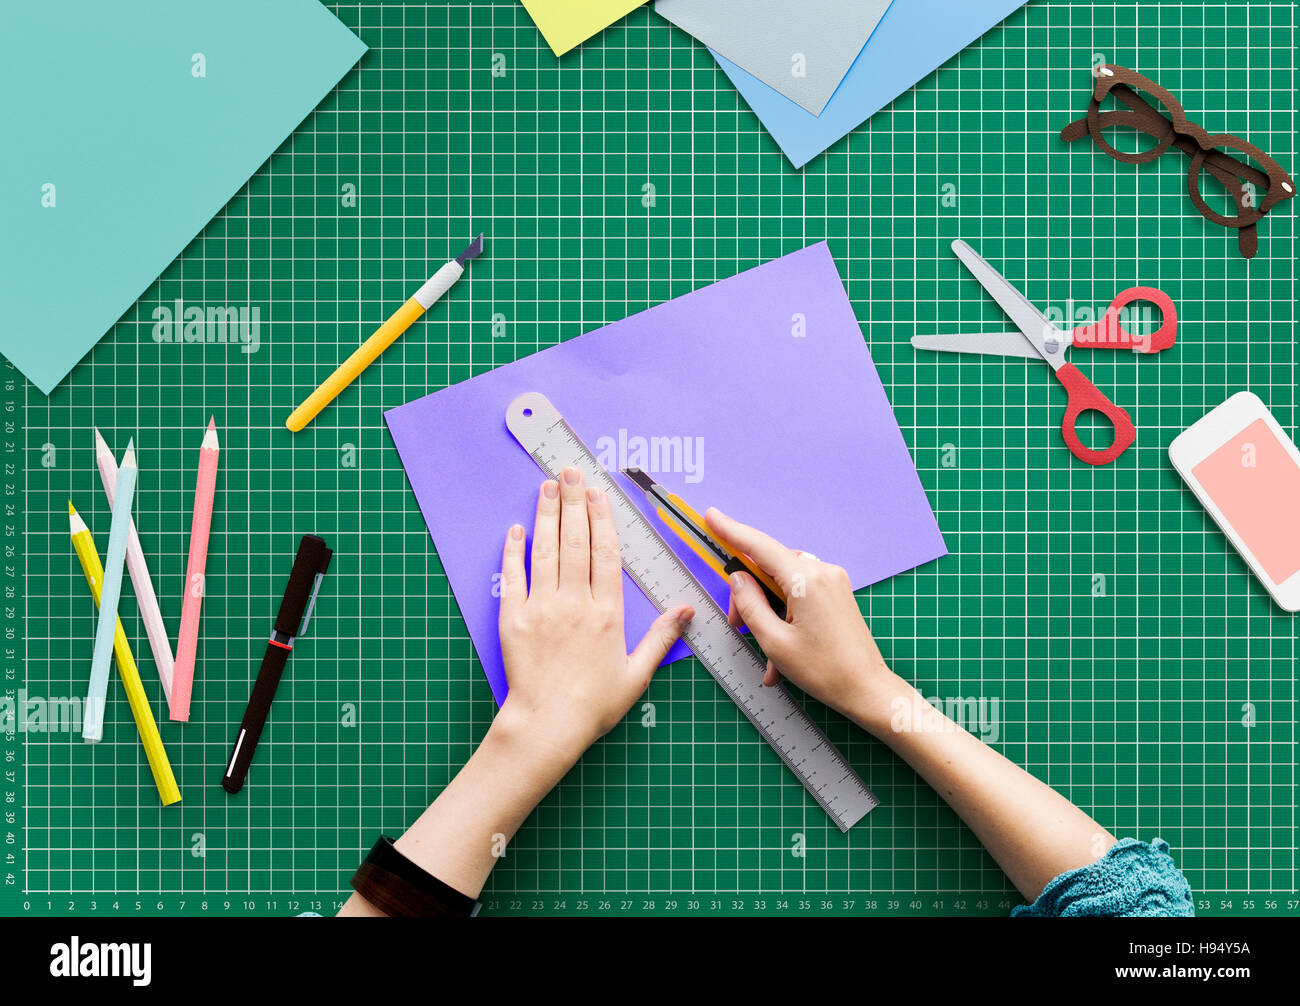 Woman Cutting Paper Stationery Workstation Concept Stock Photo